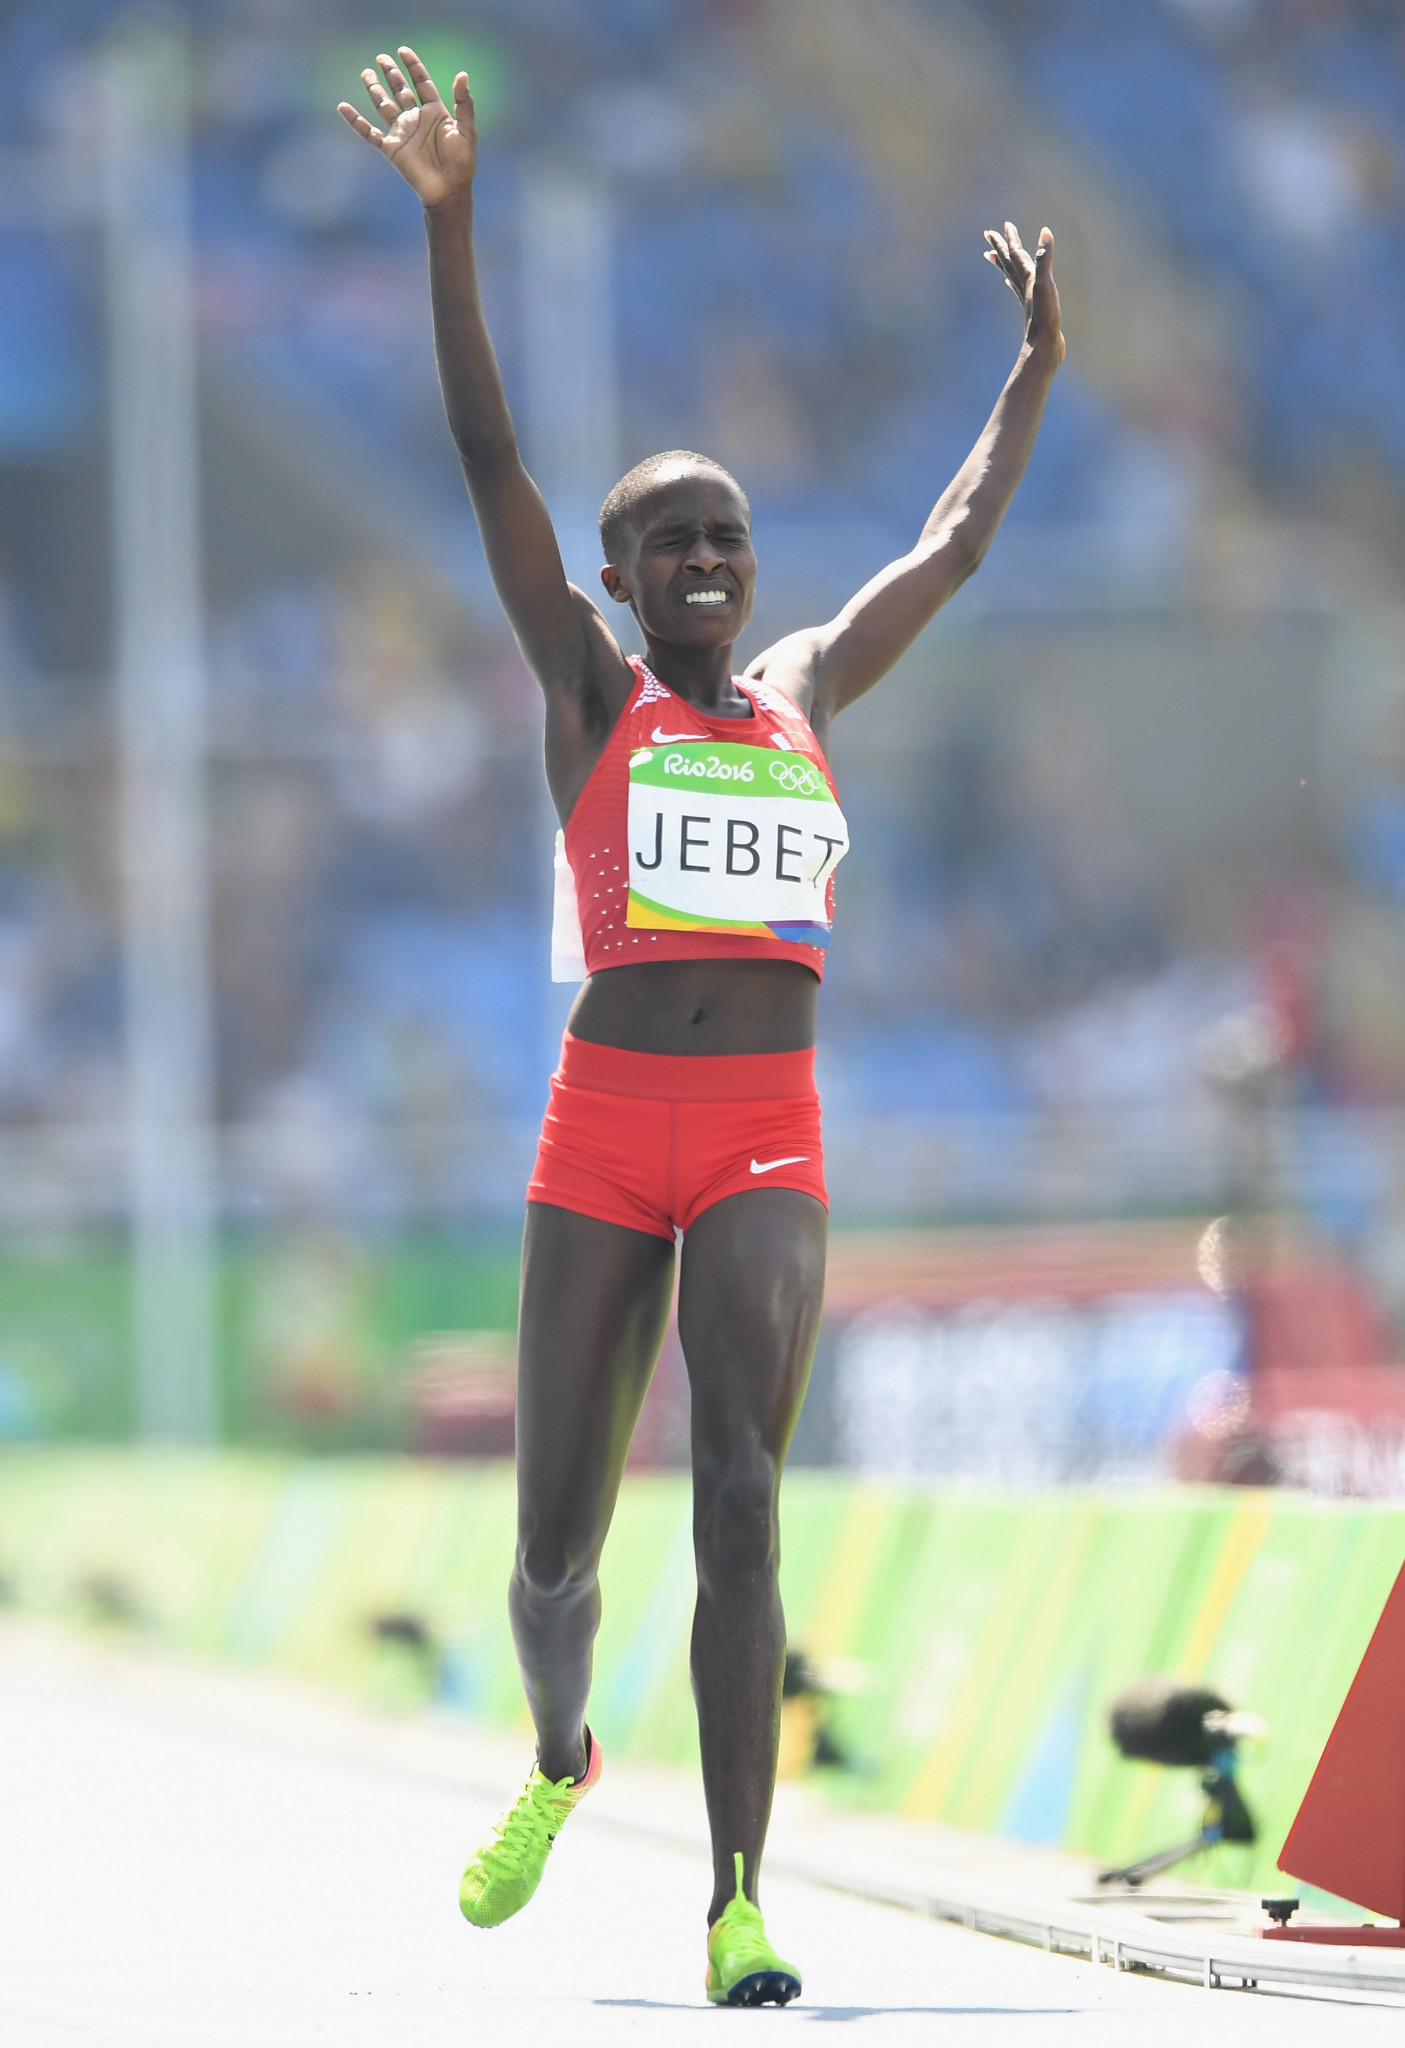 Rio 2016 gold medallist Ruth Jebet will be one of the favourites for Sunday's race ©Getty Images